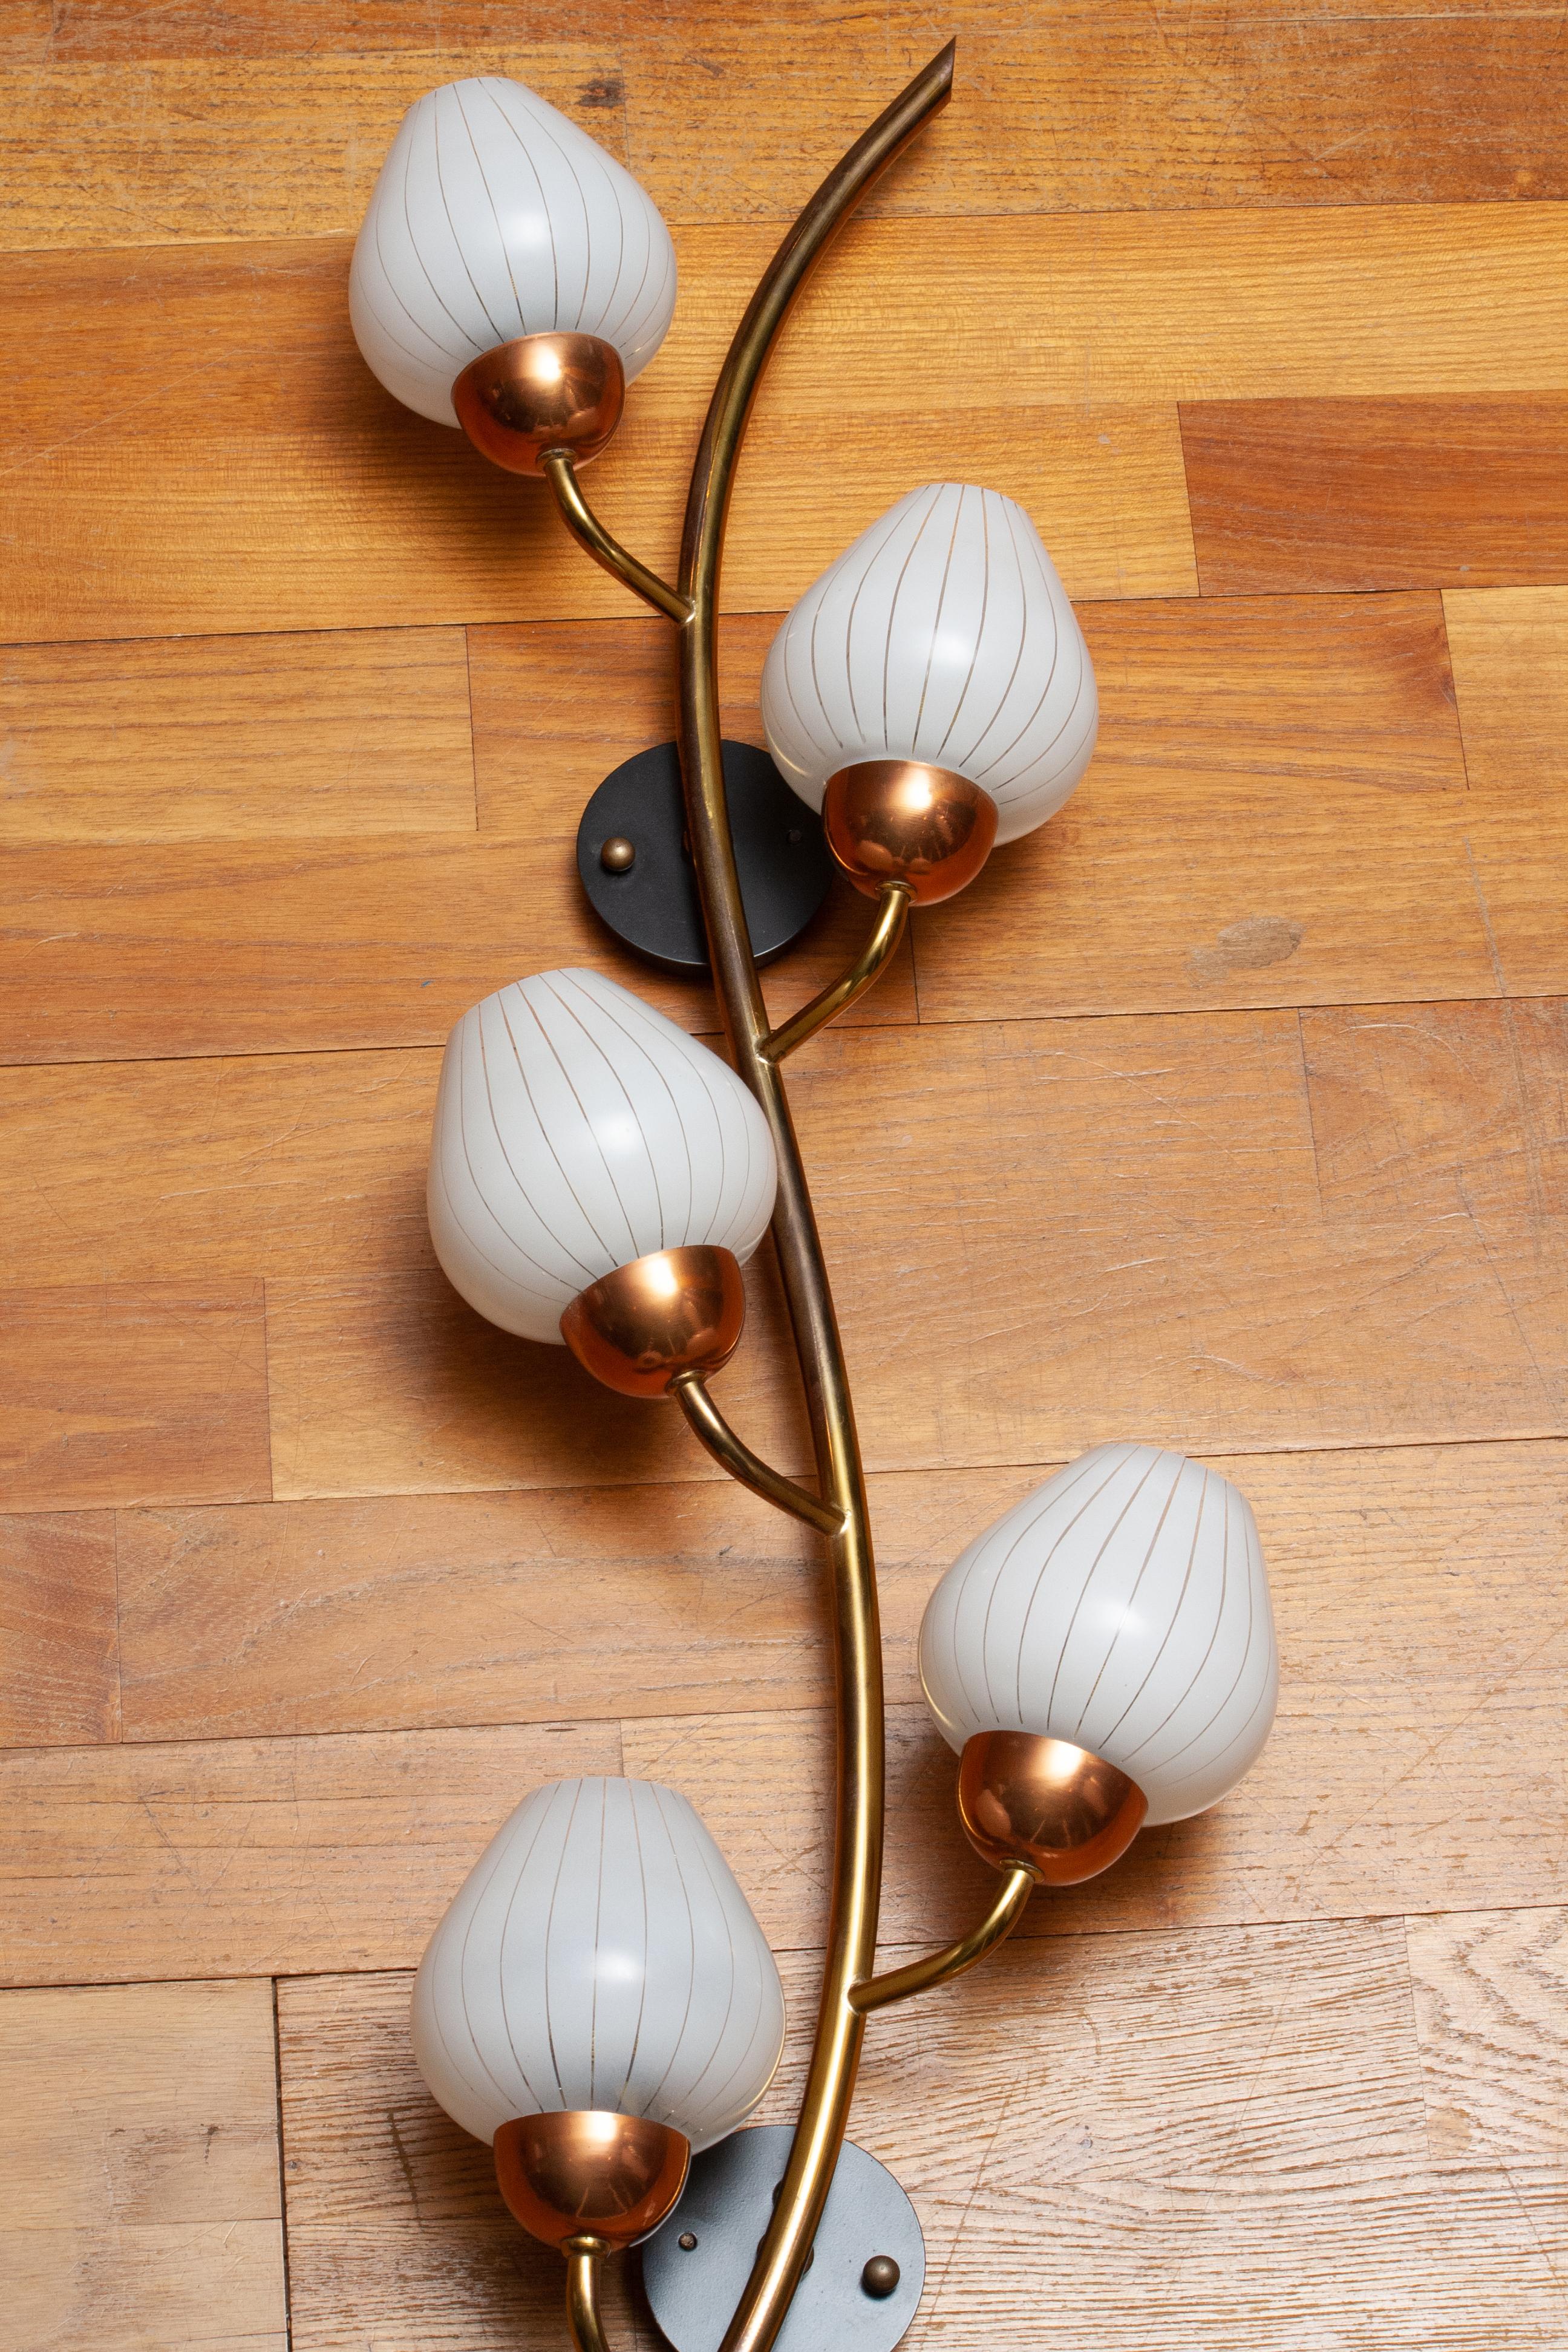 1960s Brass and Glass Wall Light Scone In Good Condition For Sale In Silvolde, Gelderland